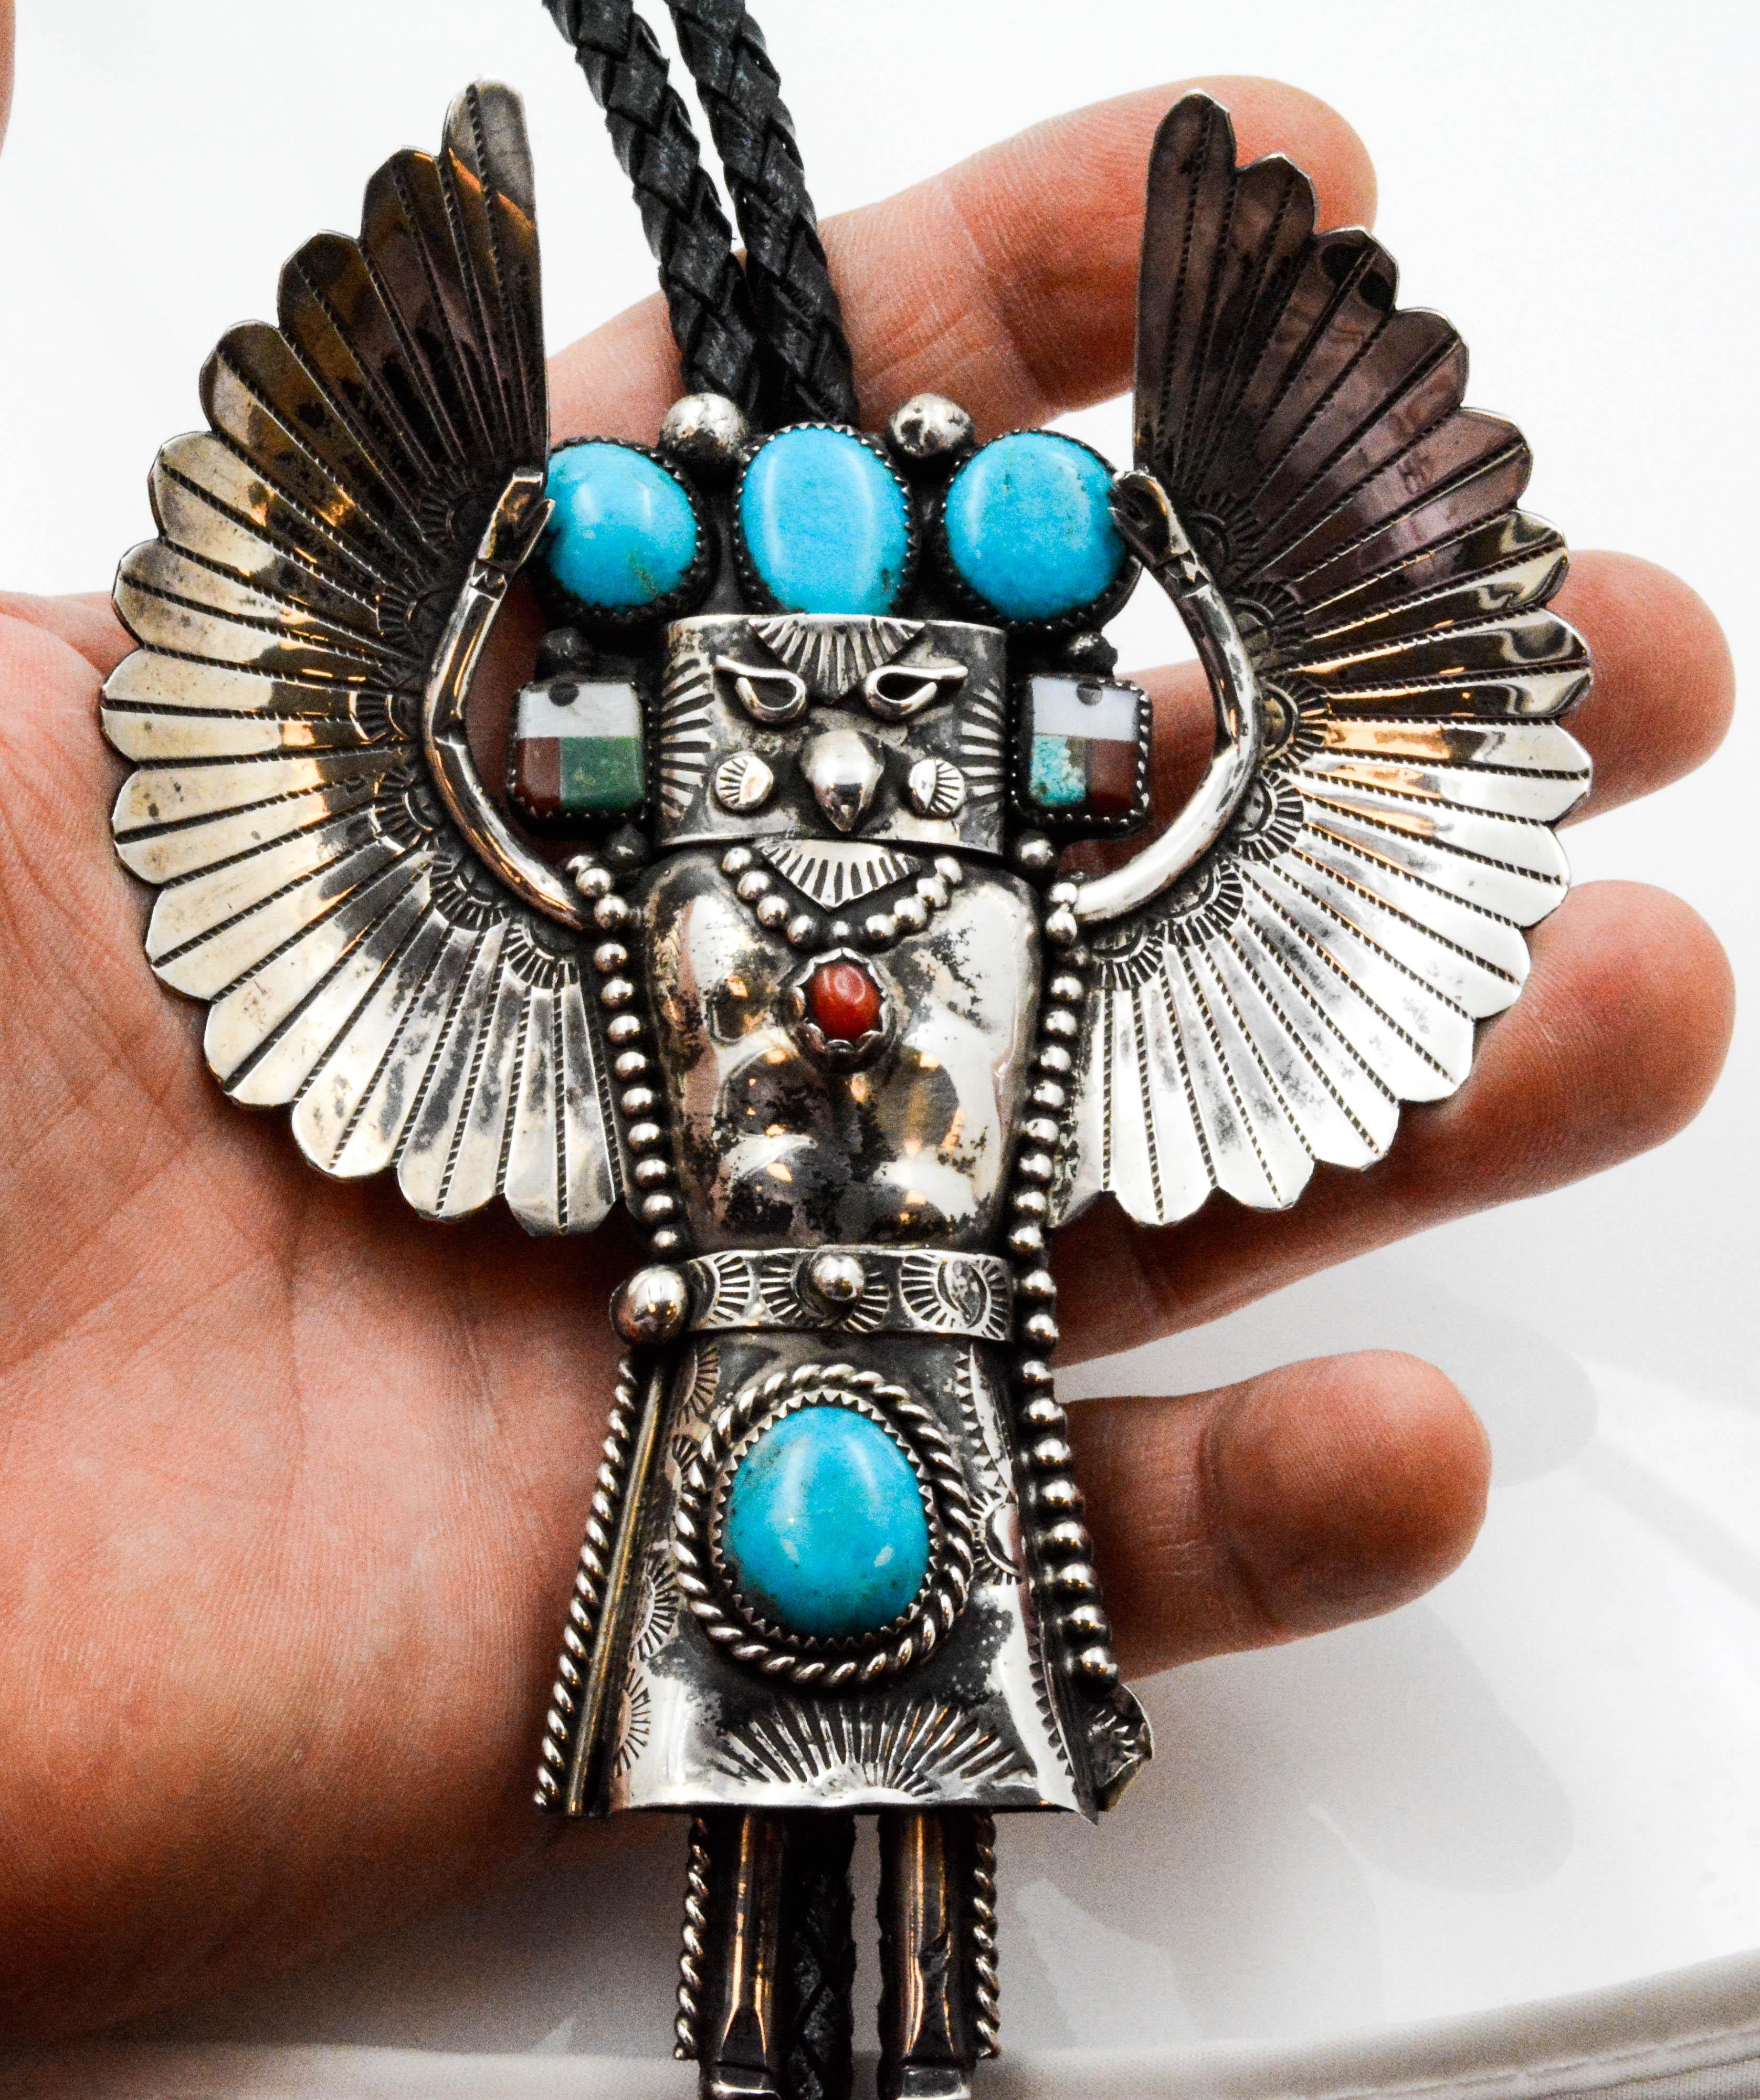 Circa 1970's handcrafted Sterling Silver Eagle Kachina Bolo tie set with 4 oval Turquoise stones. An oval Coral stone is bezel set on the chest of the Eagle Kachina, and Mother of Pearl is bezel set at the ears. This is an impressive piece with